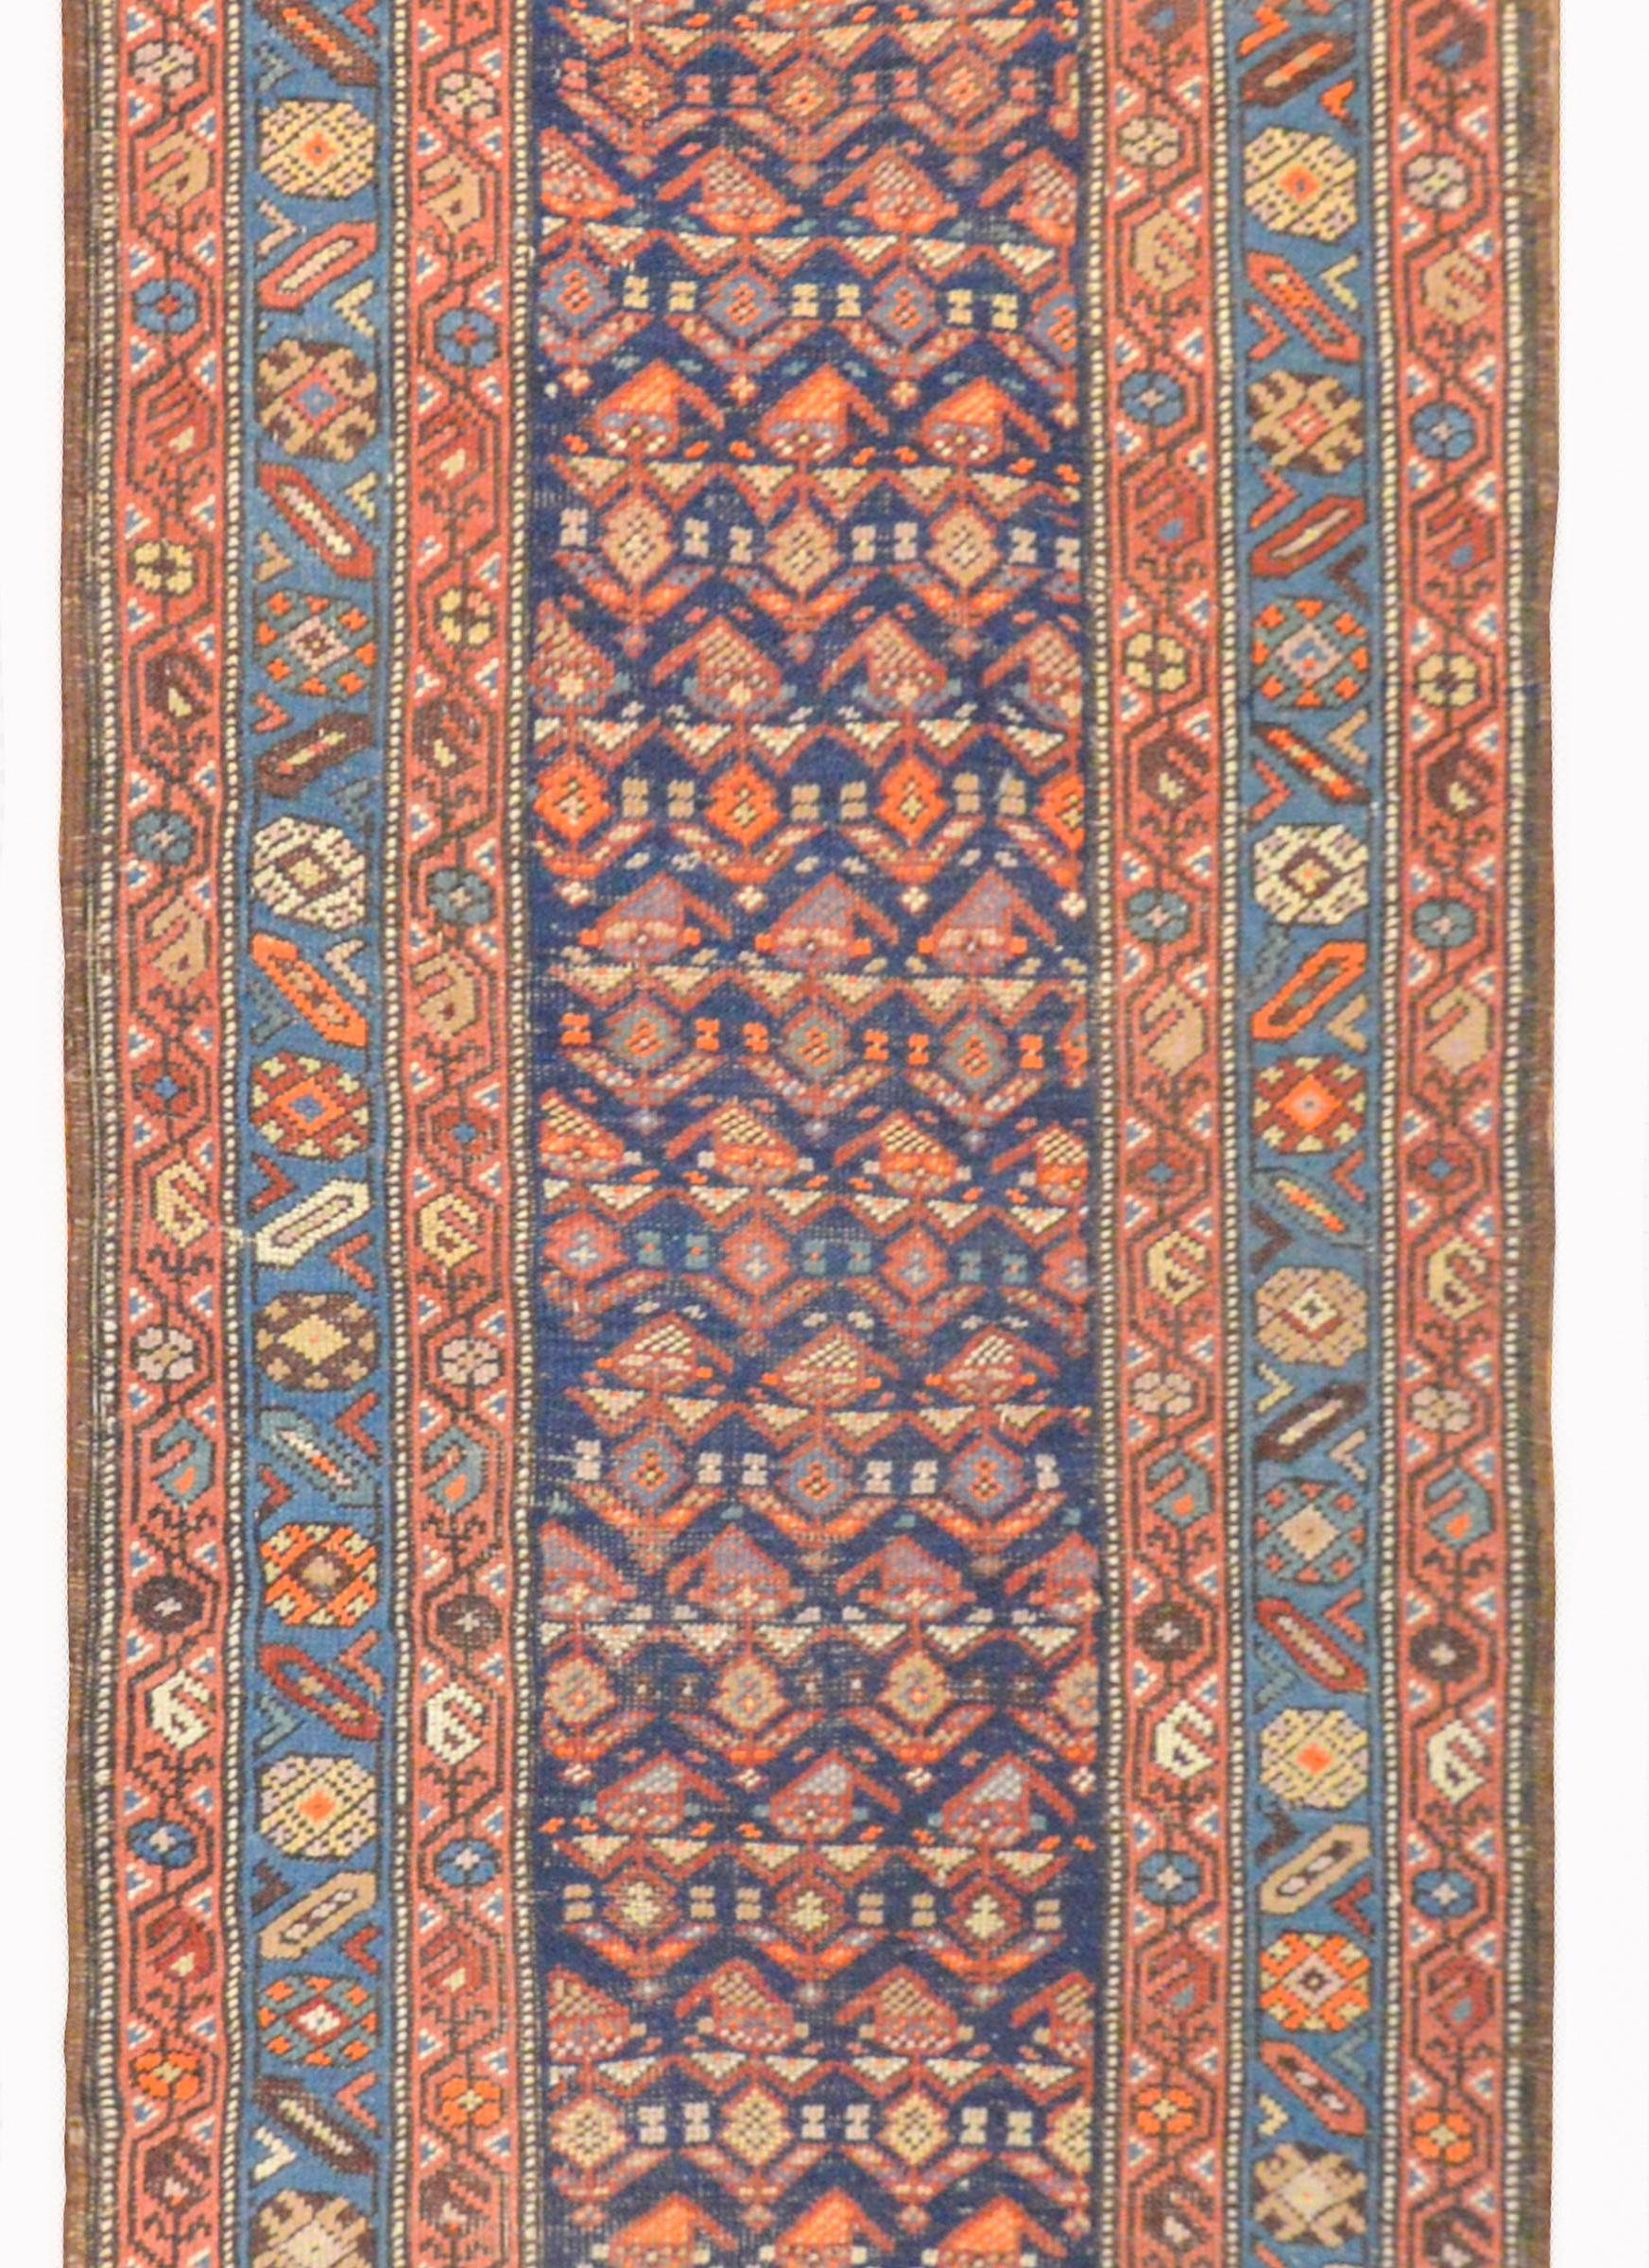 A gorgeous early 20th century Persian Azari runner with an all-over stylized paisley pattern woven in myriad colors including crimson, light and dark indigo, orange, and lavender on a dark indigo background, surrounded by three distinct stylized